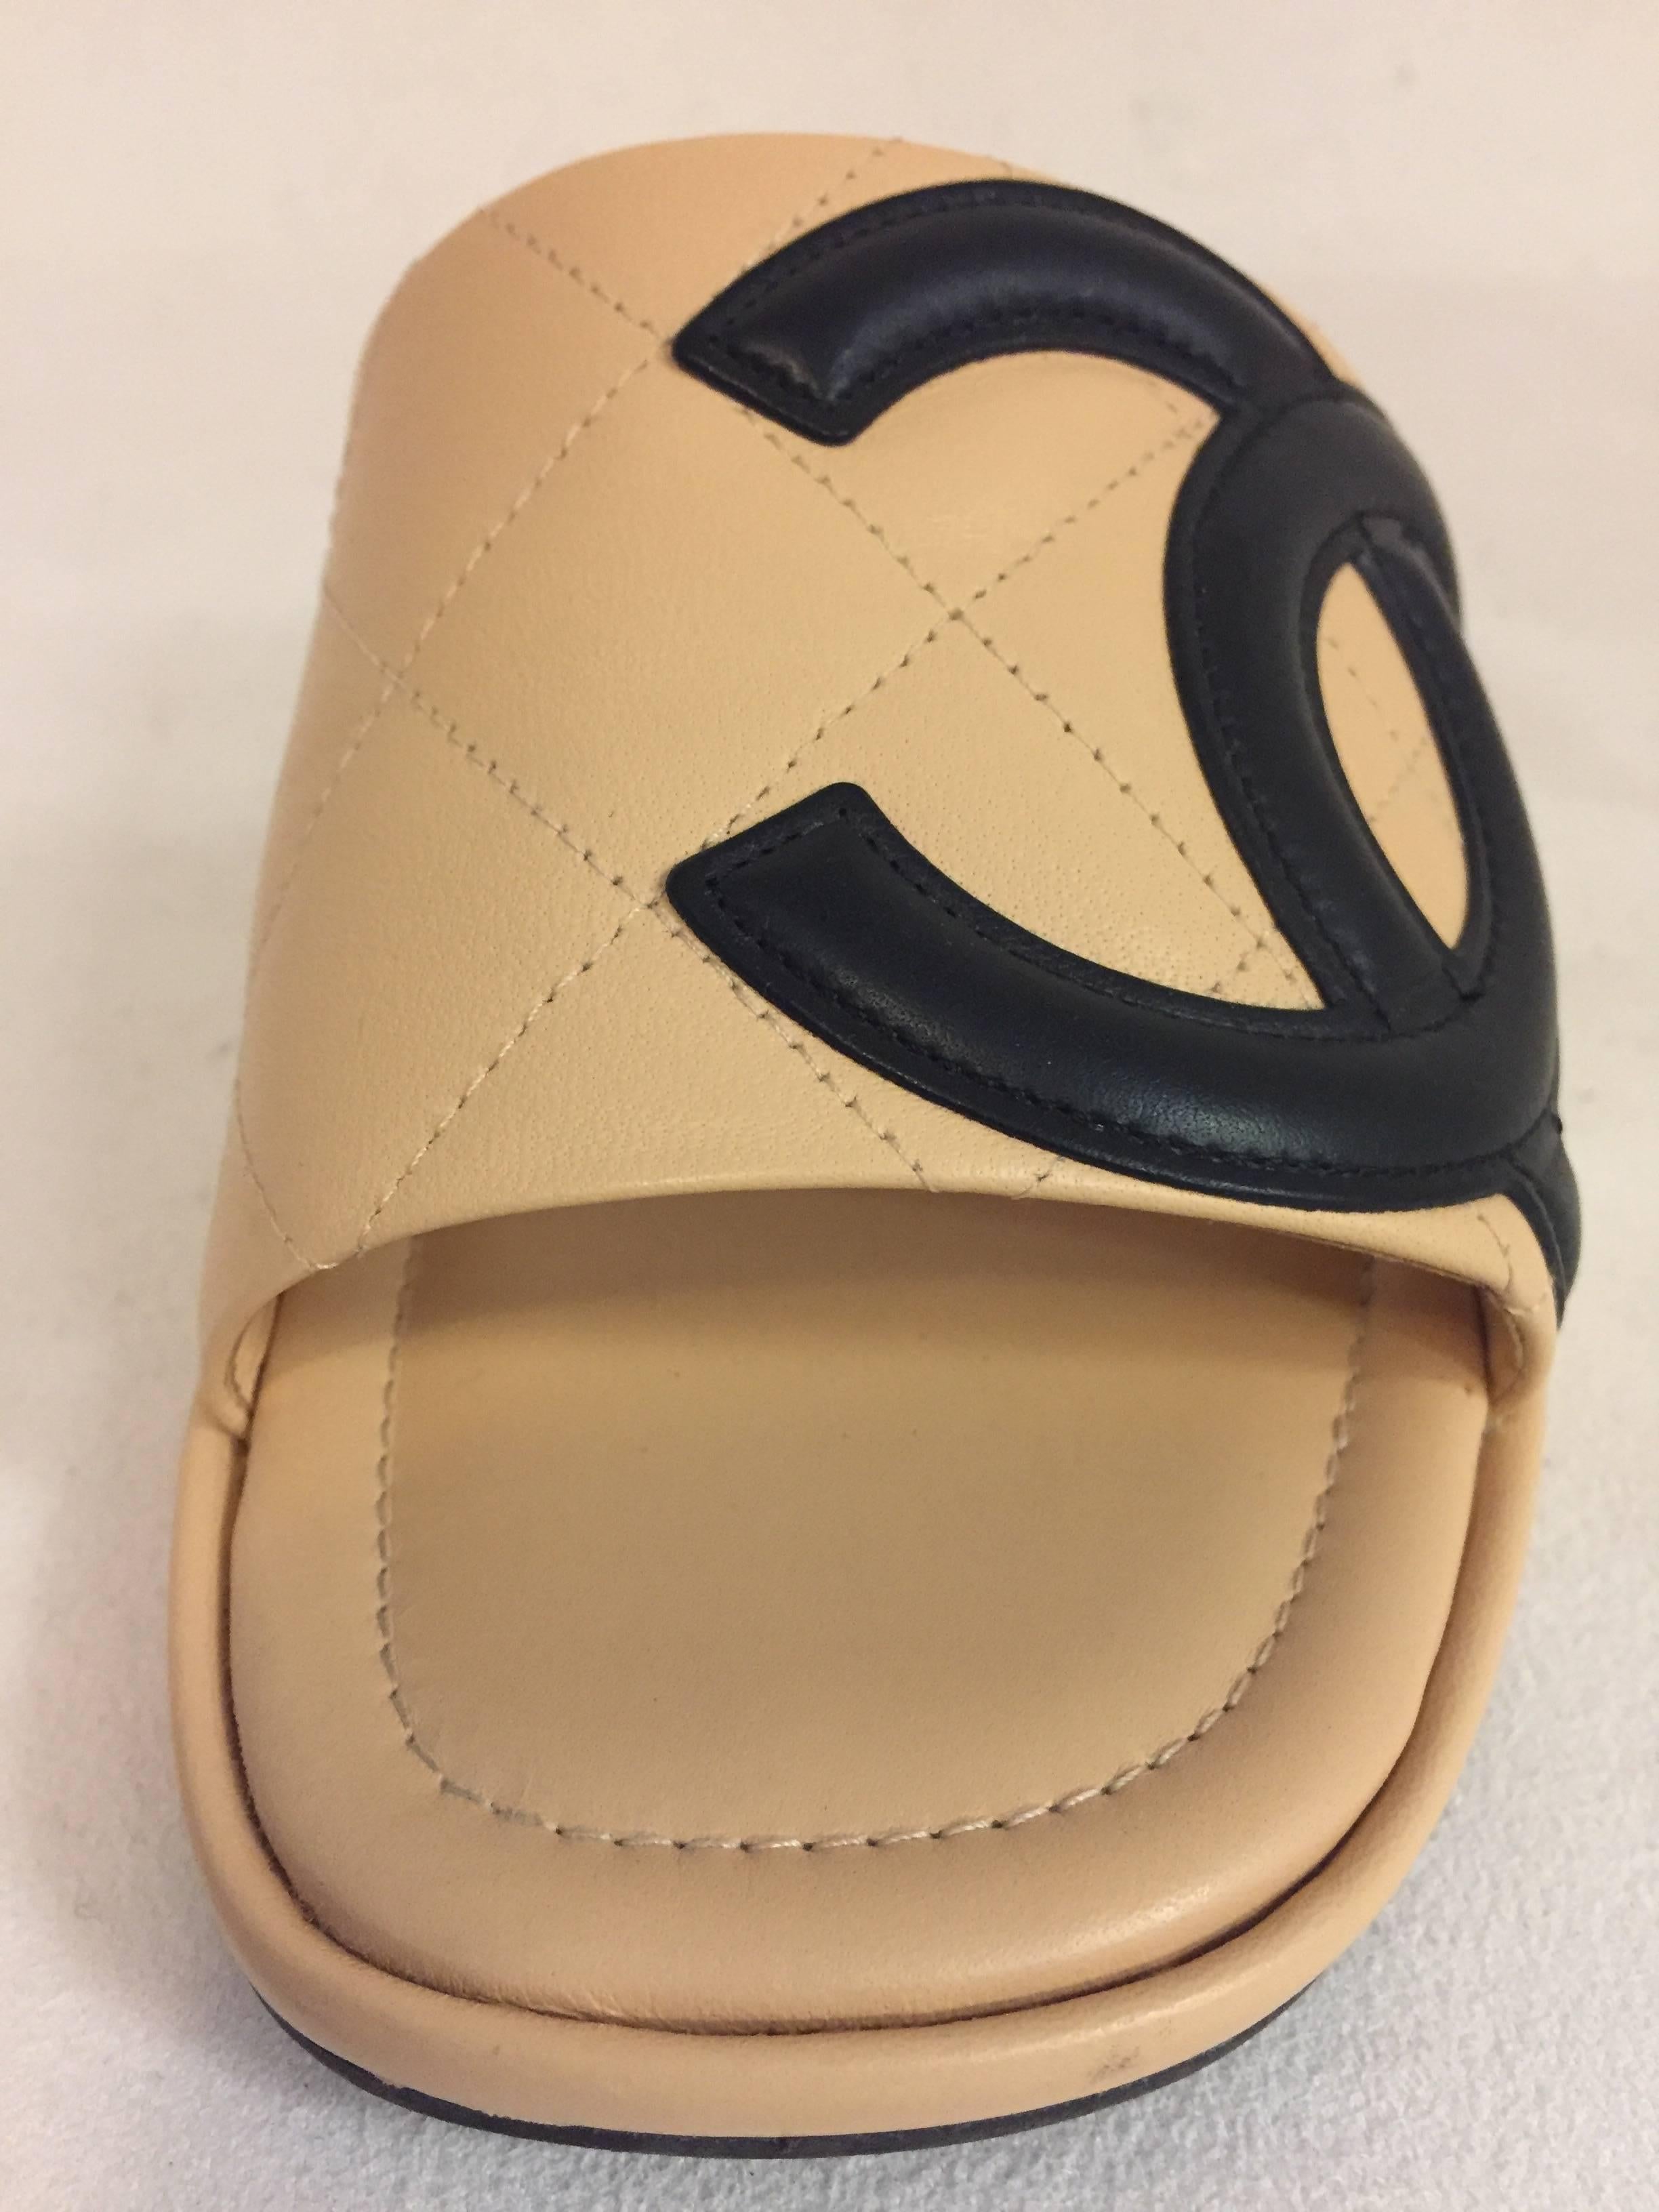 Chanel Cambon casual quilted slides in beige with black interlocking CC embroided on outer side of strap.  These slides can be paired perfectly with jeans or any daytime attire.  These slides are in excellent condition in size 6.50 and Made in